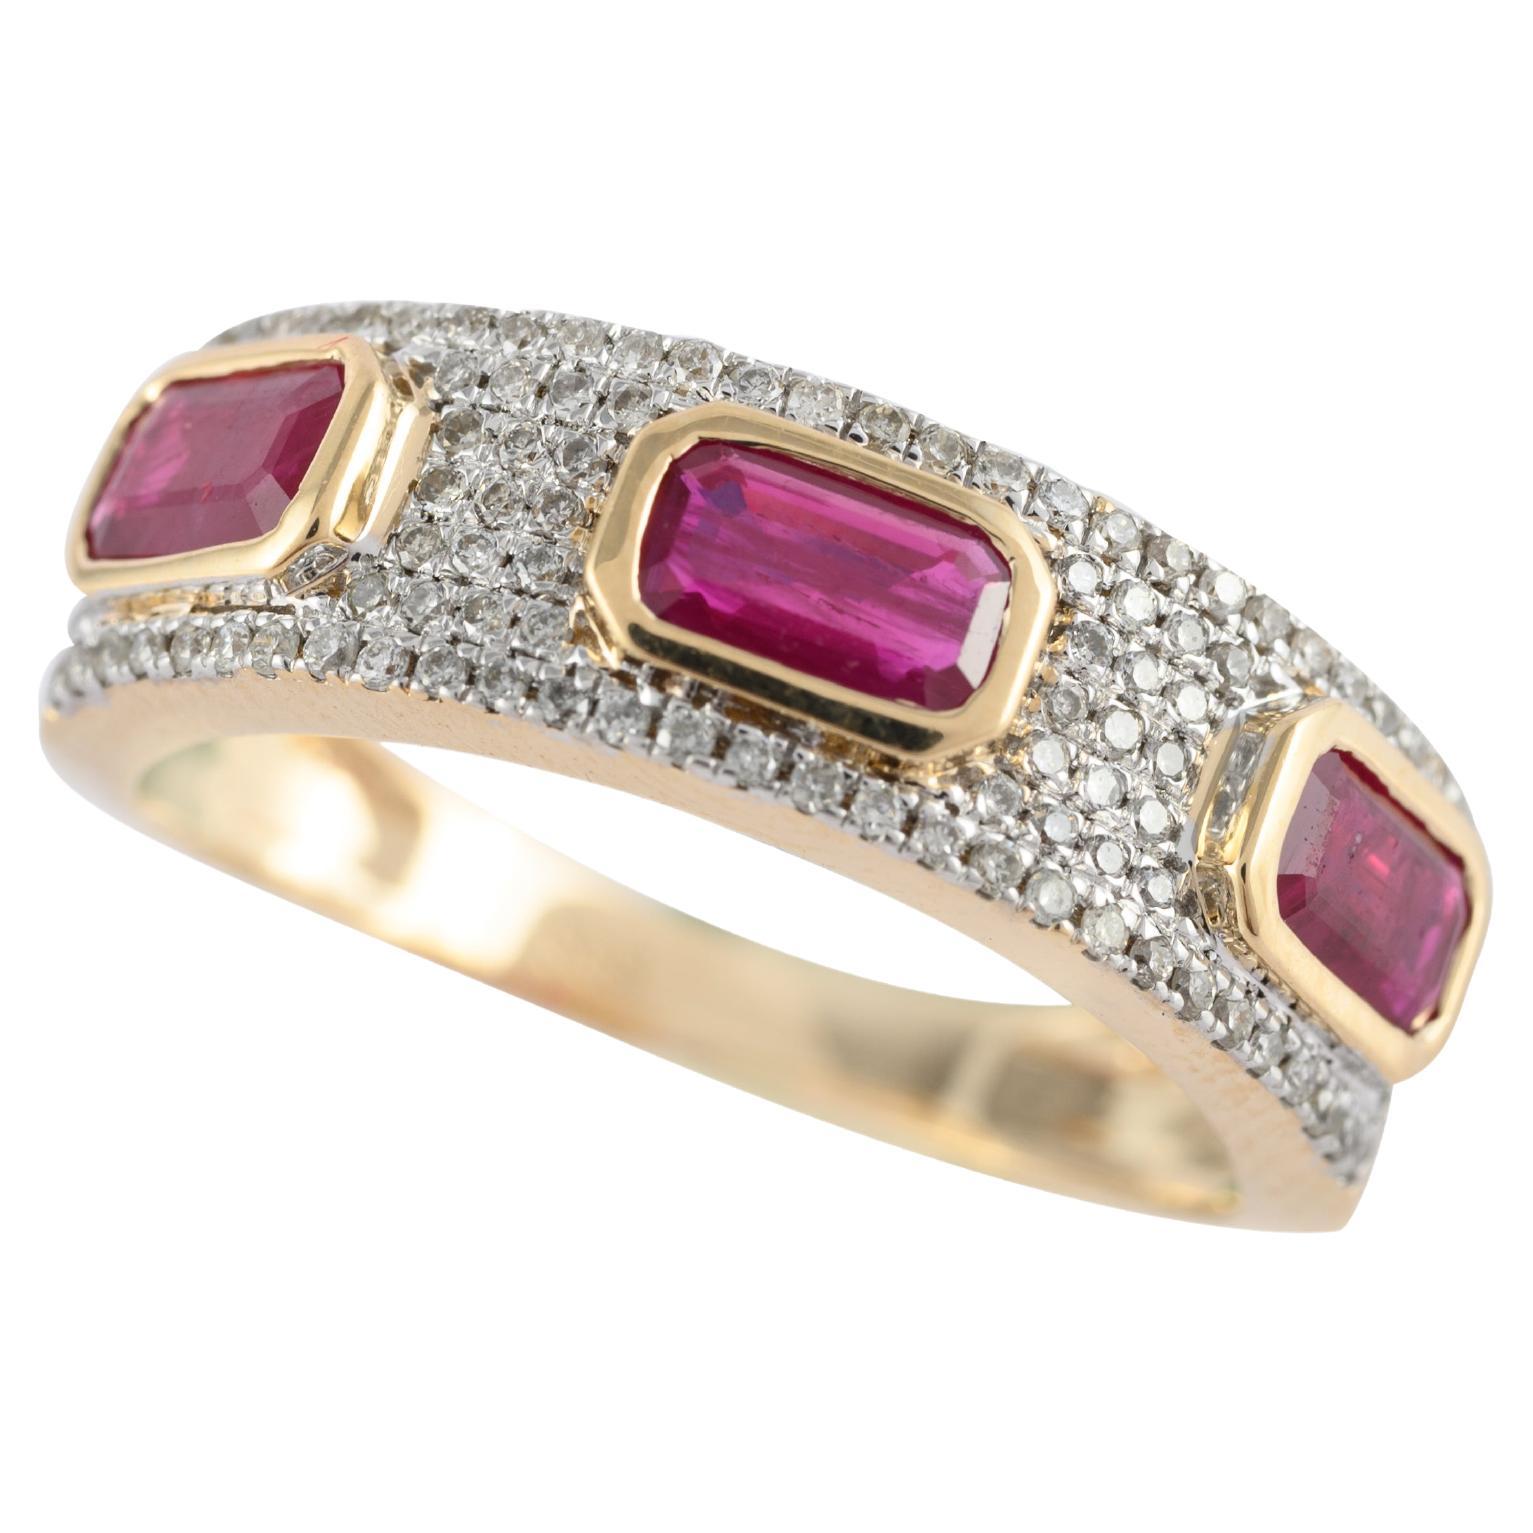 Statement Diamond and Ruby Wedding Ring Studded in 14k Solid Yellow Gold